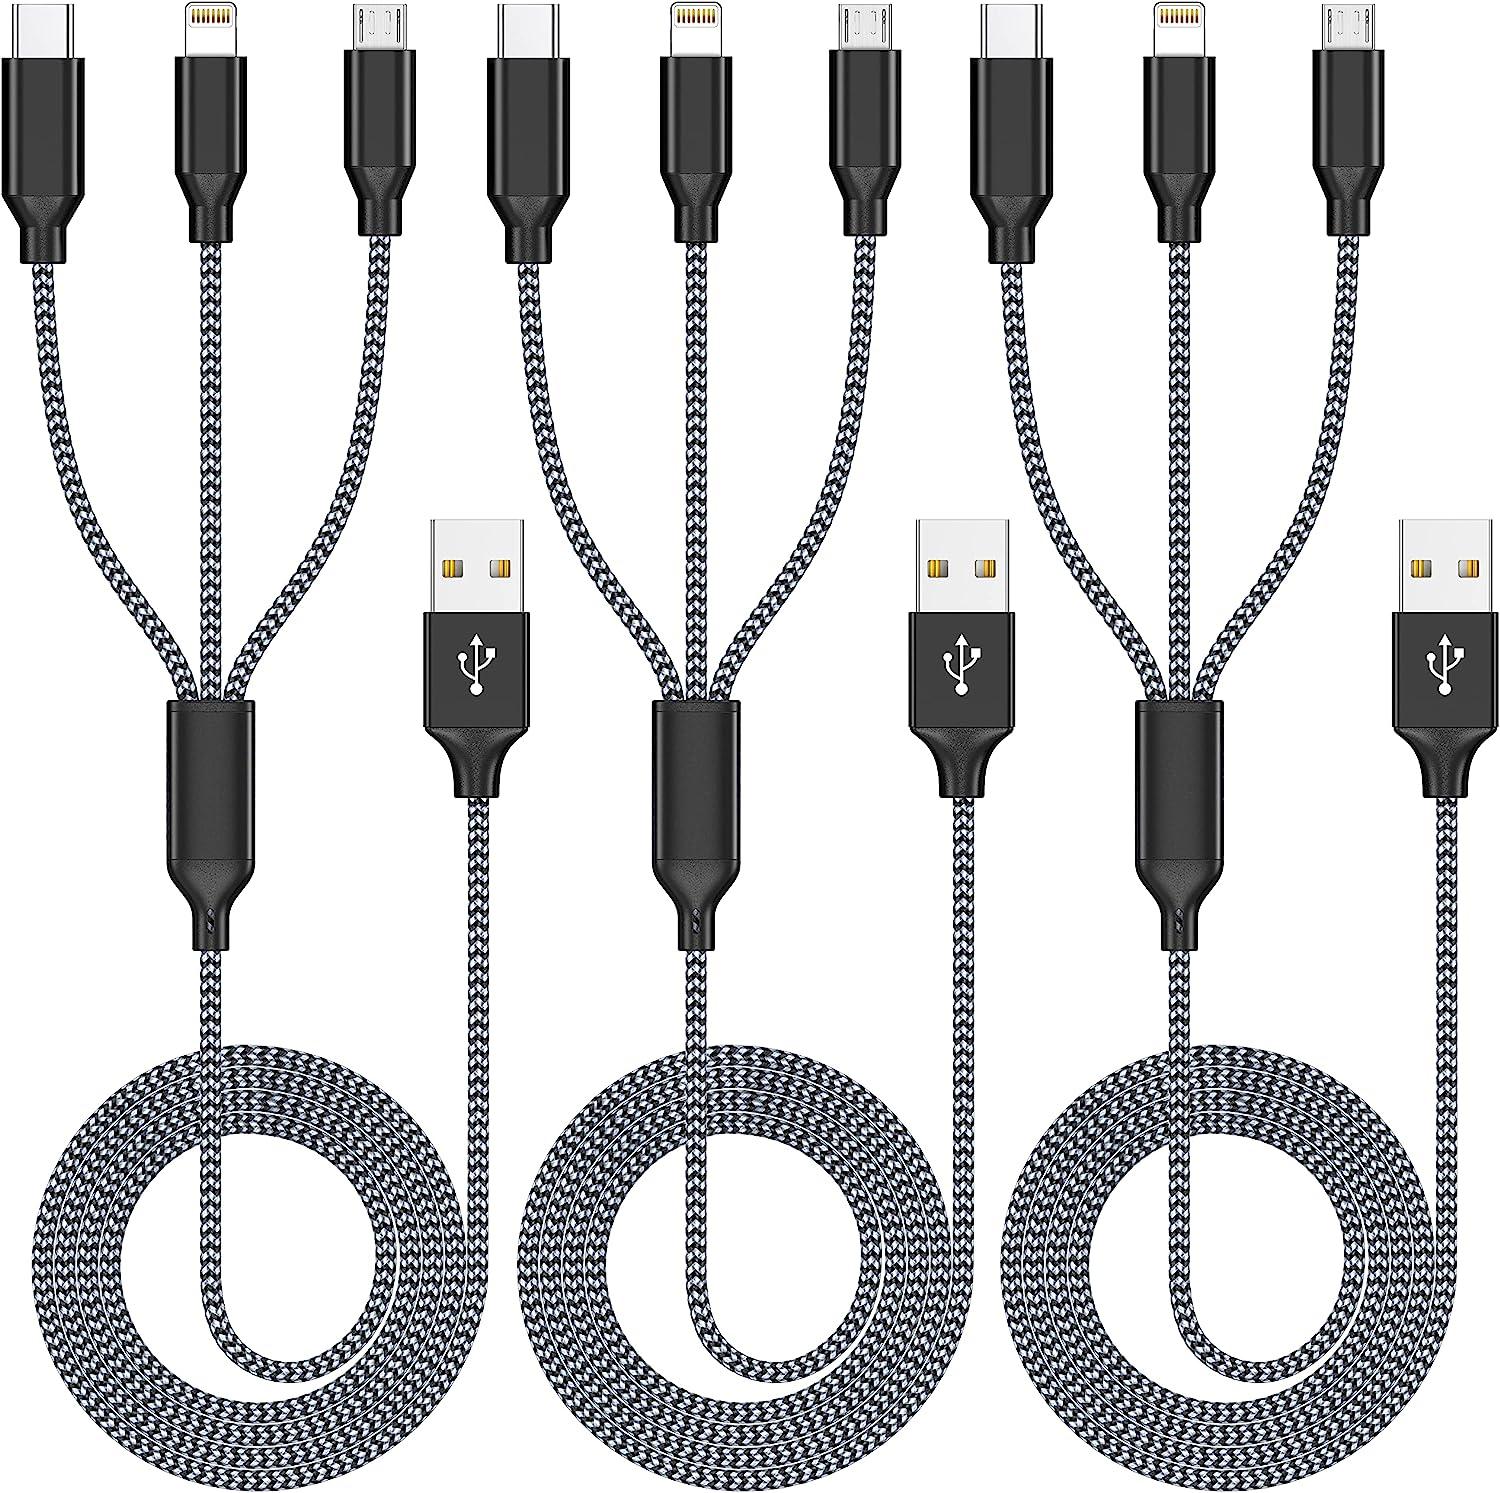 3 in 1 USB Charging Cable with microUSB USB-C and Lightning 3 Pack for $5.99